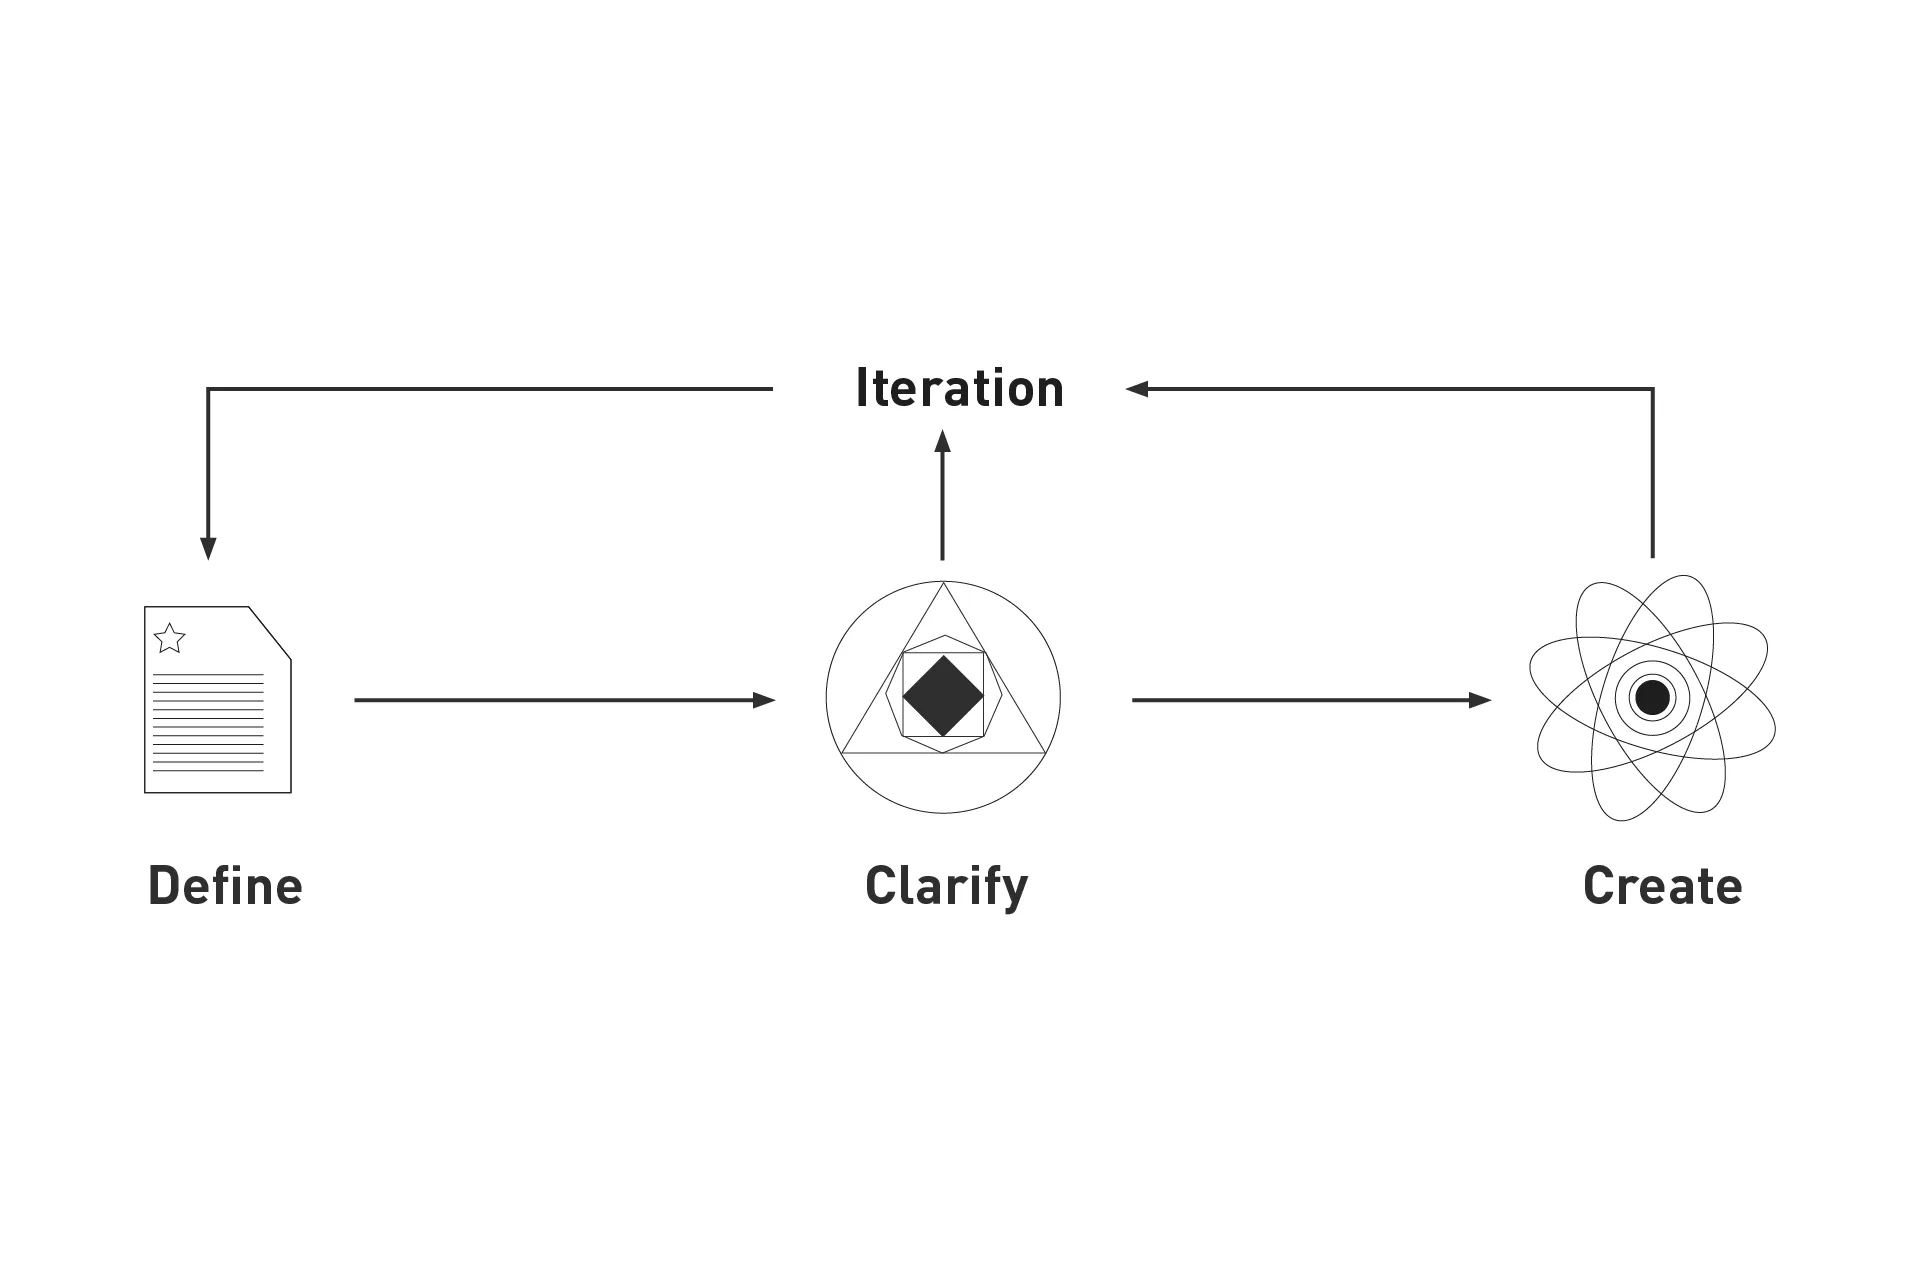 A visual that demonstrates a circular iterative process that goes from define, which is symbolized as a document, to clarify, which is symbolized as a geometric alignment, through creation which is symbolized as a nucleus.